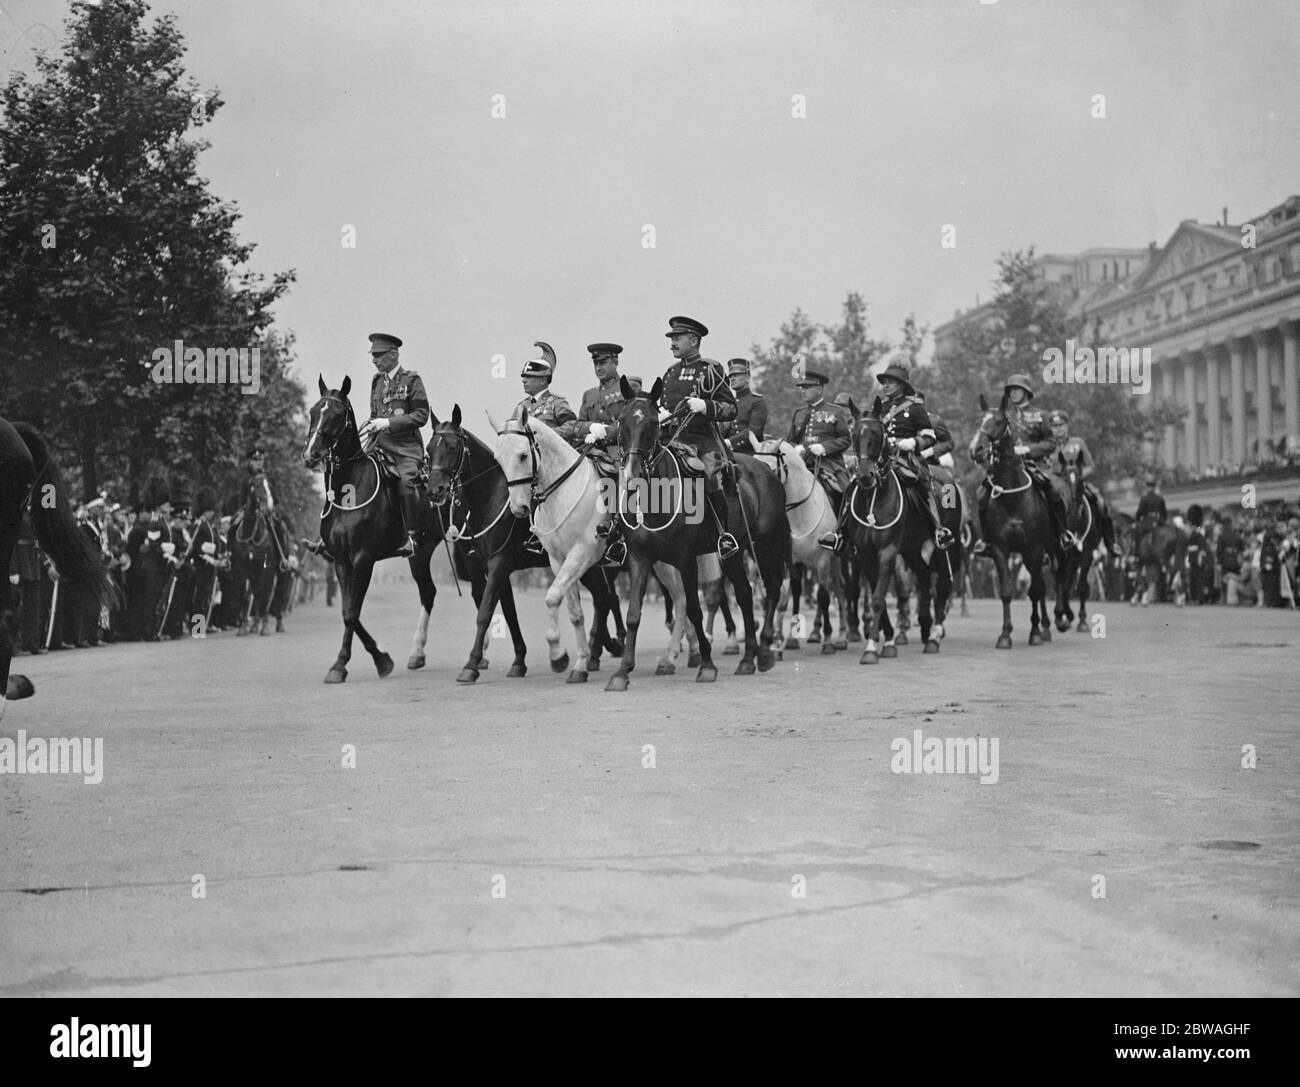 His Majesty the King presents new Colours to the guards Foreign military attaches form part of the parade 23 June 1936 Stock Photo